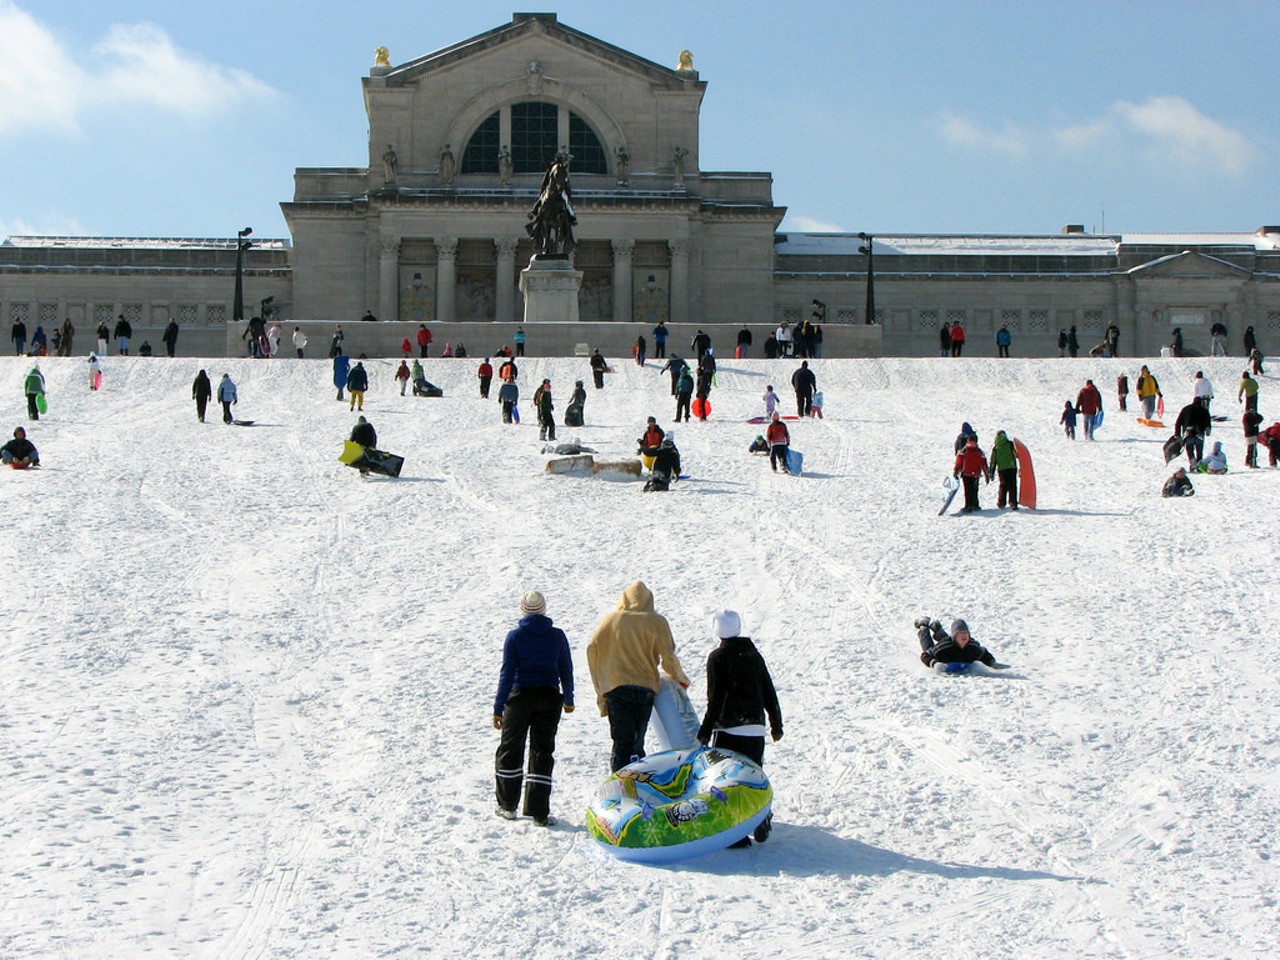 Go sledding on Art Hill.
Snow days in St. Louis were the best growing up. The two inches of snow on the ground supposedly made it too dangerous to make it to school -- but of course, it wasn't bad enough to make it to Art Hill (1 Fine Arts Dr.) for some serious sledding. Let's be honest, though; when was the last time you joined the kids in plunging down that glorious hill? Grab your coat and boots -- this is your year to let out your inner kid again. Photo courtesy of Flickr / Jim Rhodes